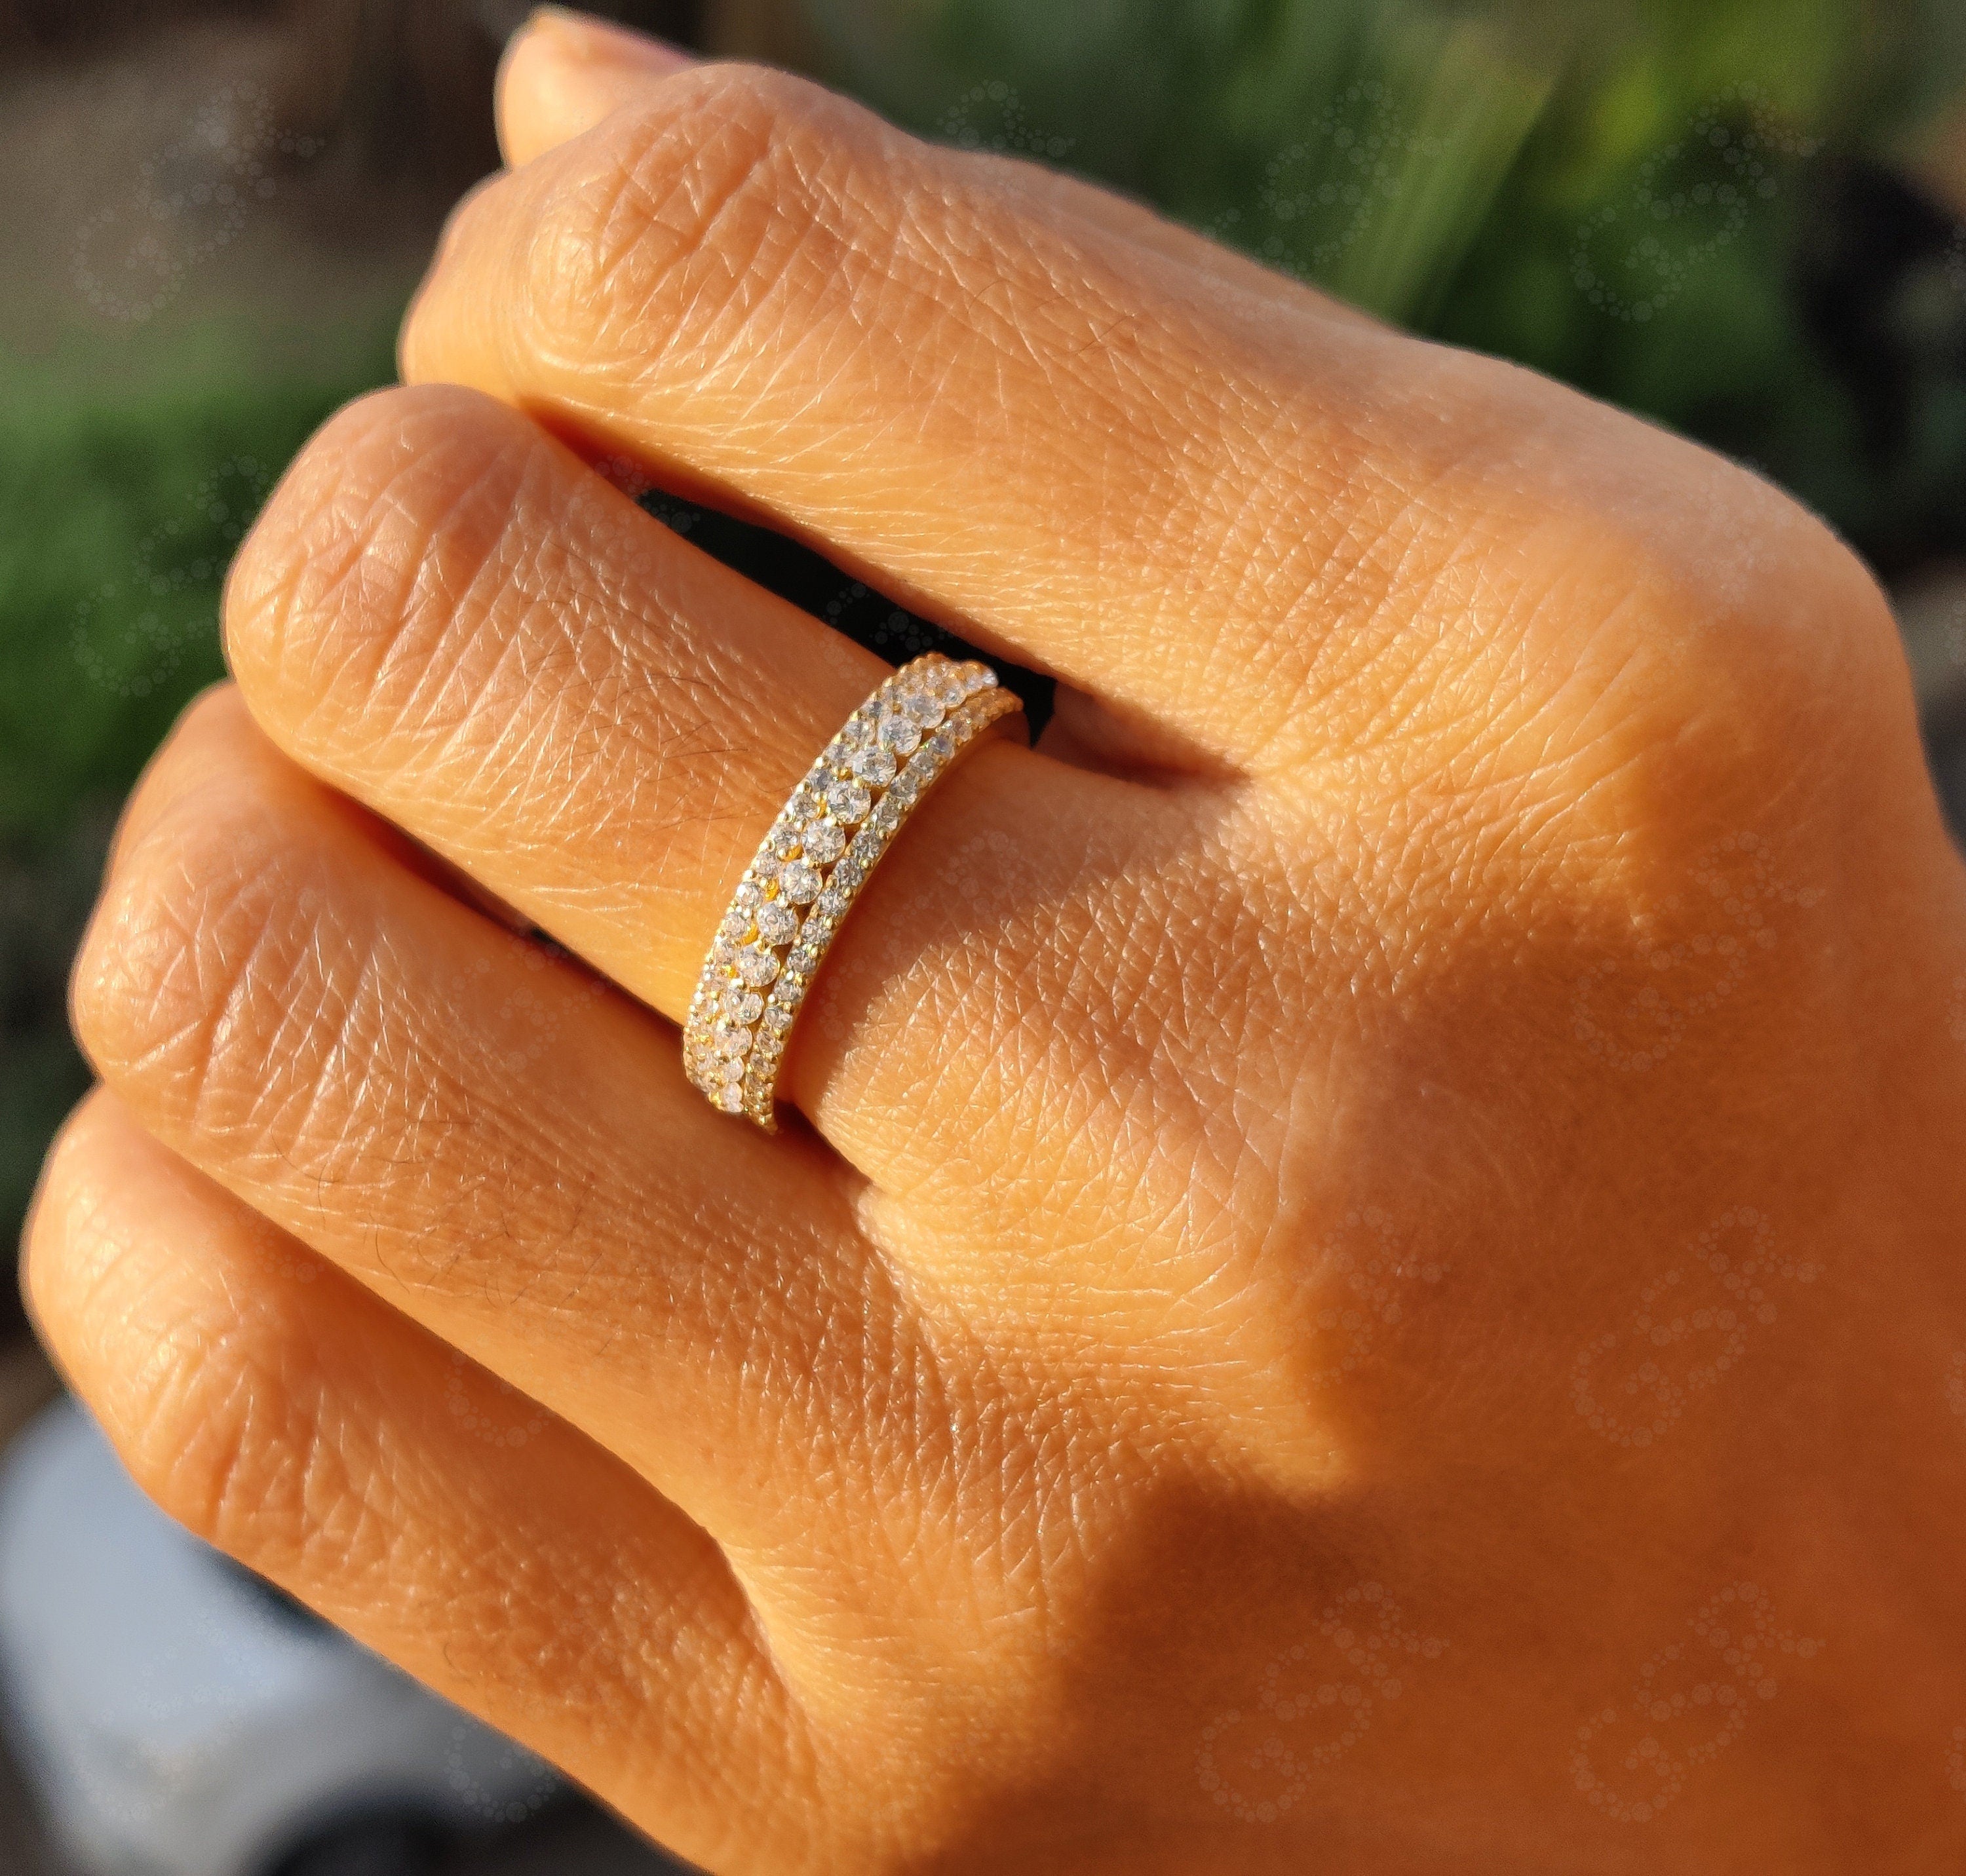 Radiant Love: Moissanite Anniversary Ring in Silver and Gold, a Half Eternity Band with Round Brilliant Cut Moissanite Stones, Perfect for Stacking